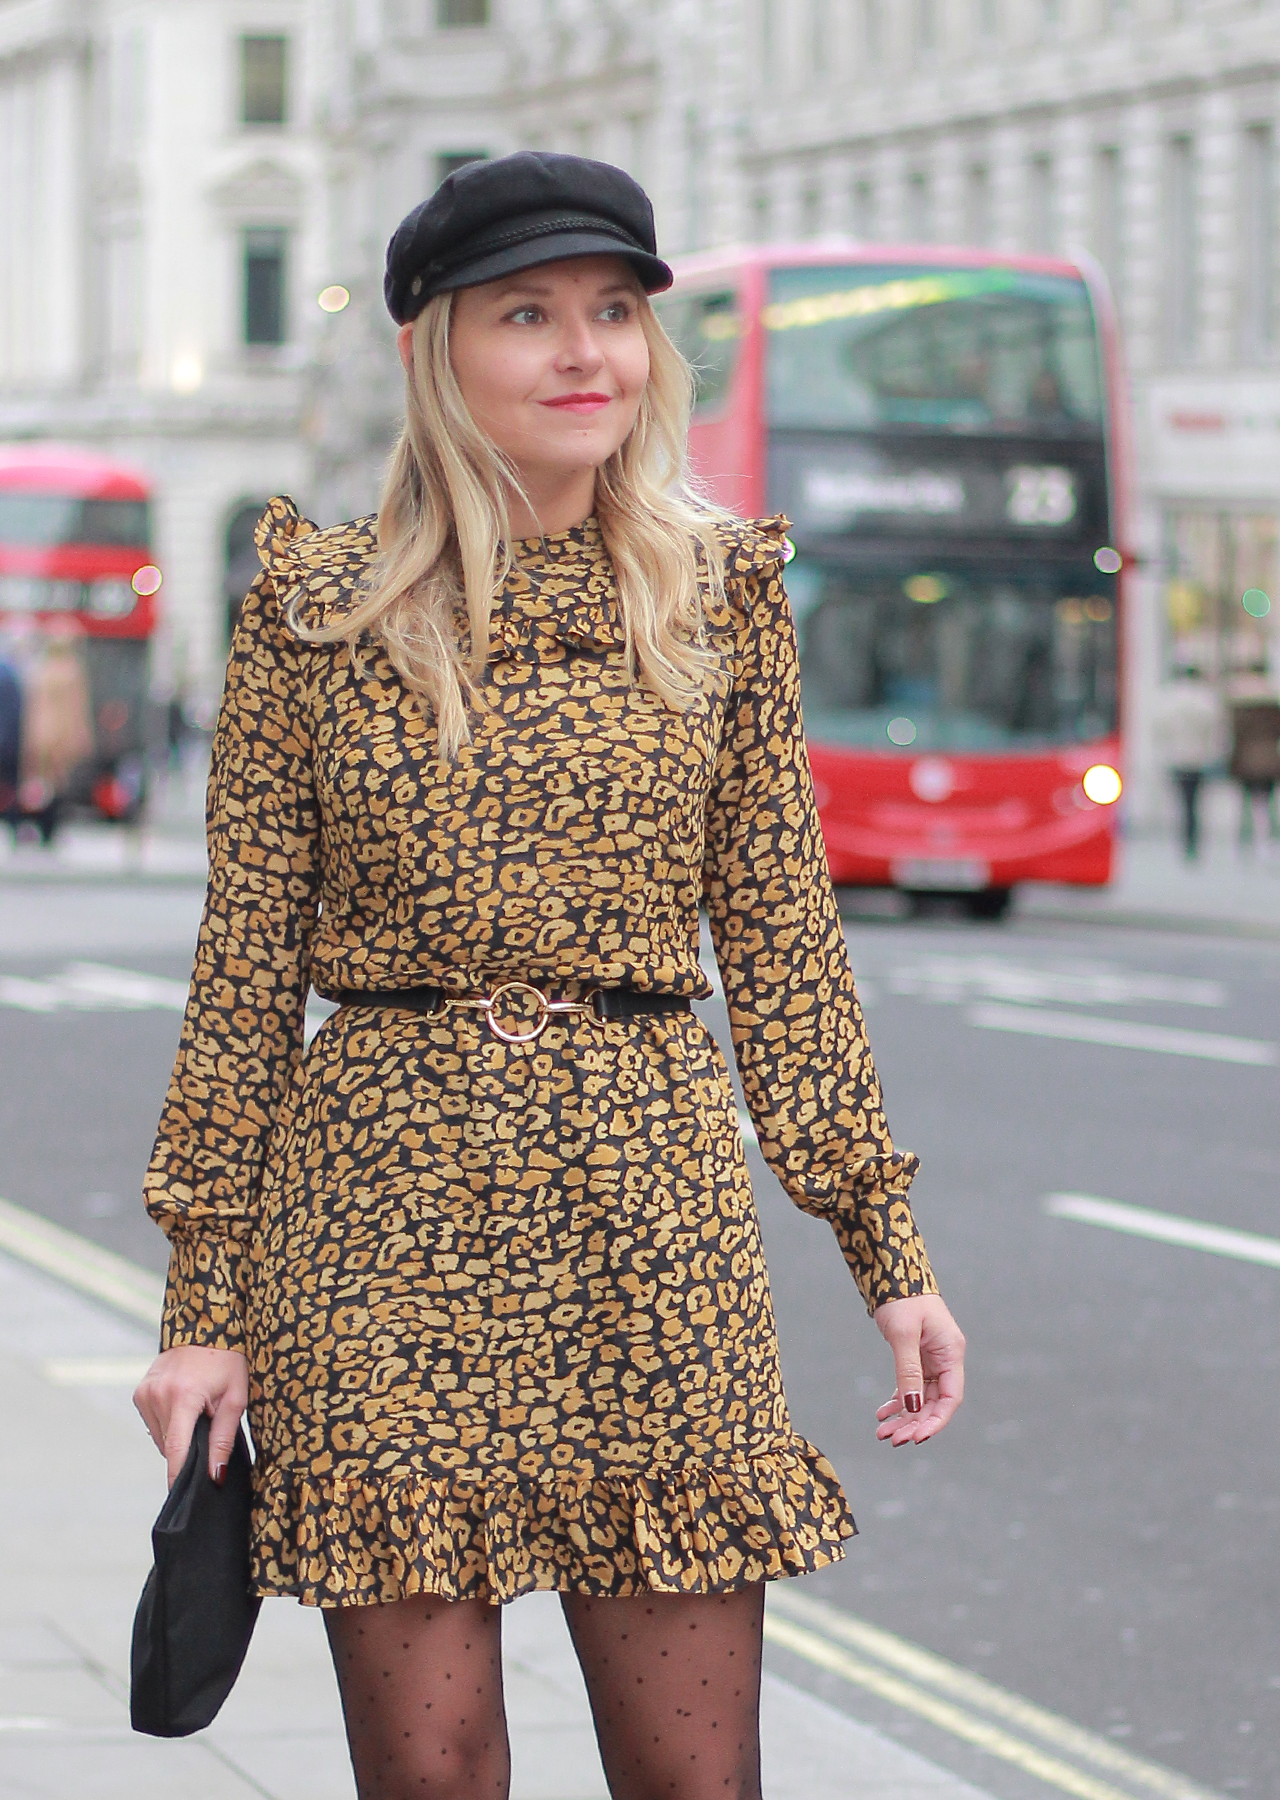 The Steele Maiden: London Night Out Style - Leopard Ruffle Dress, Fisherman's Cap and Patent Booties